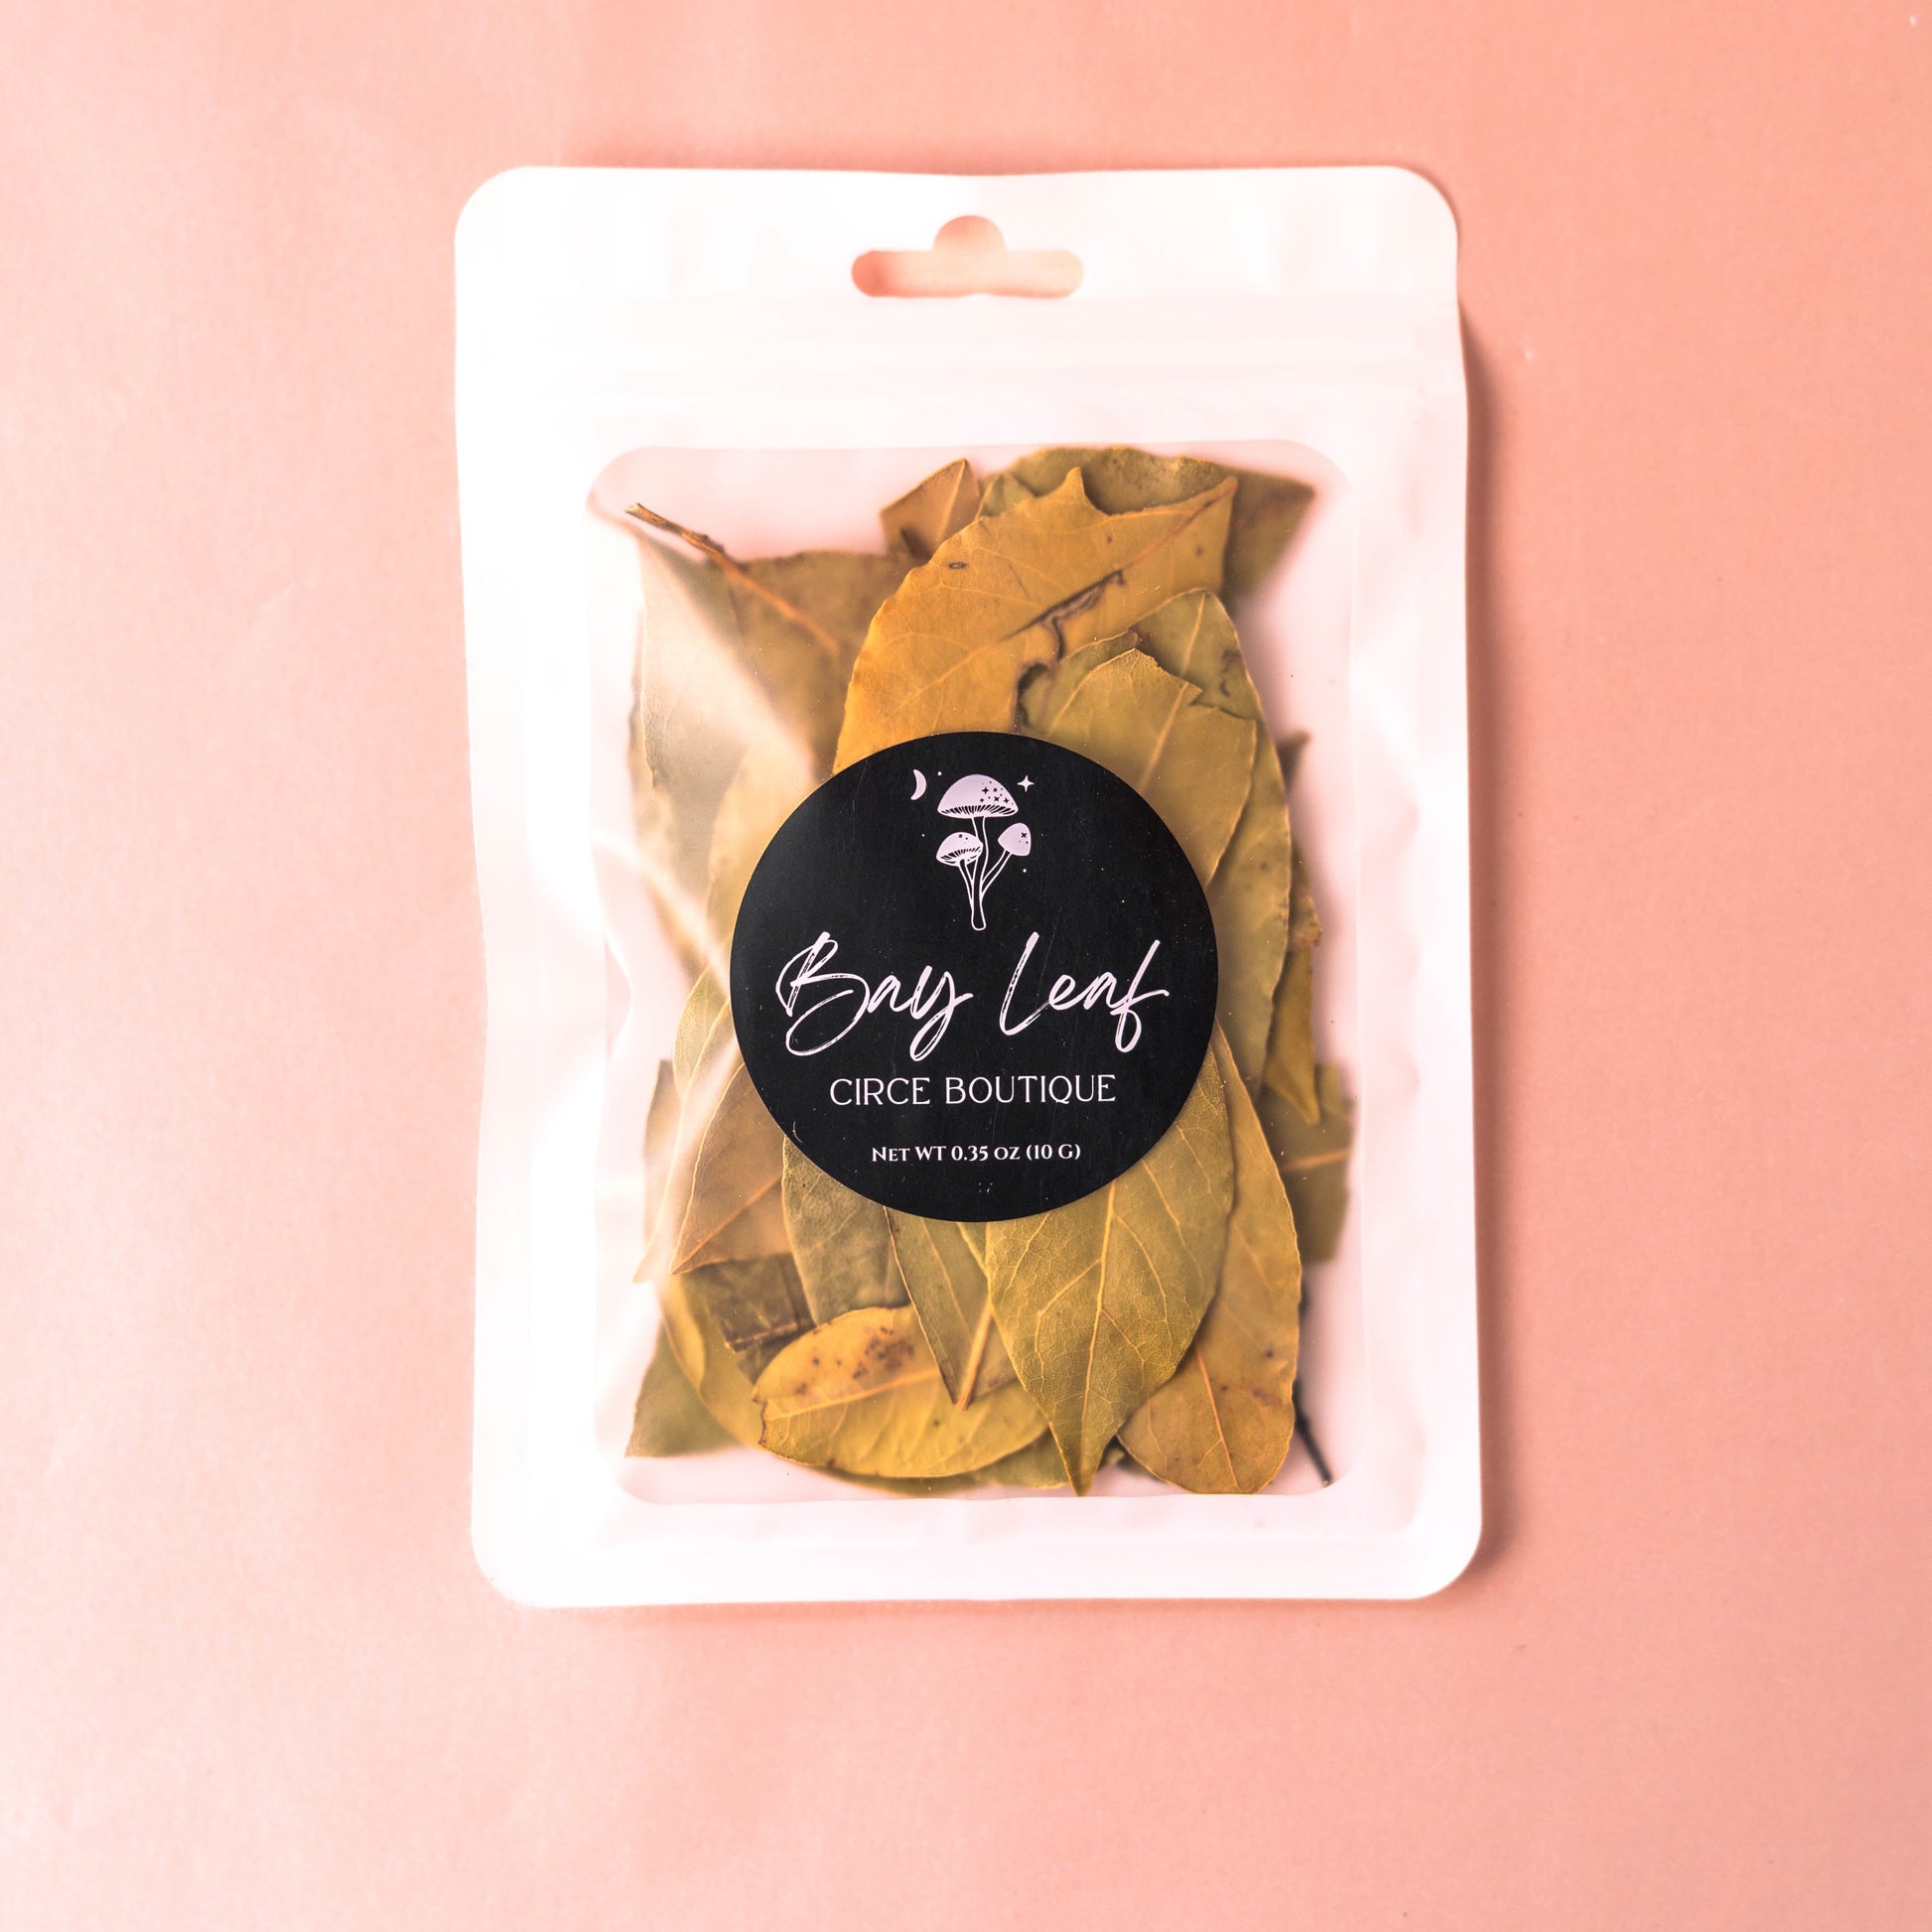 CIRCE Bay Leaf .35oz - Herbs  from CirceBoutique